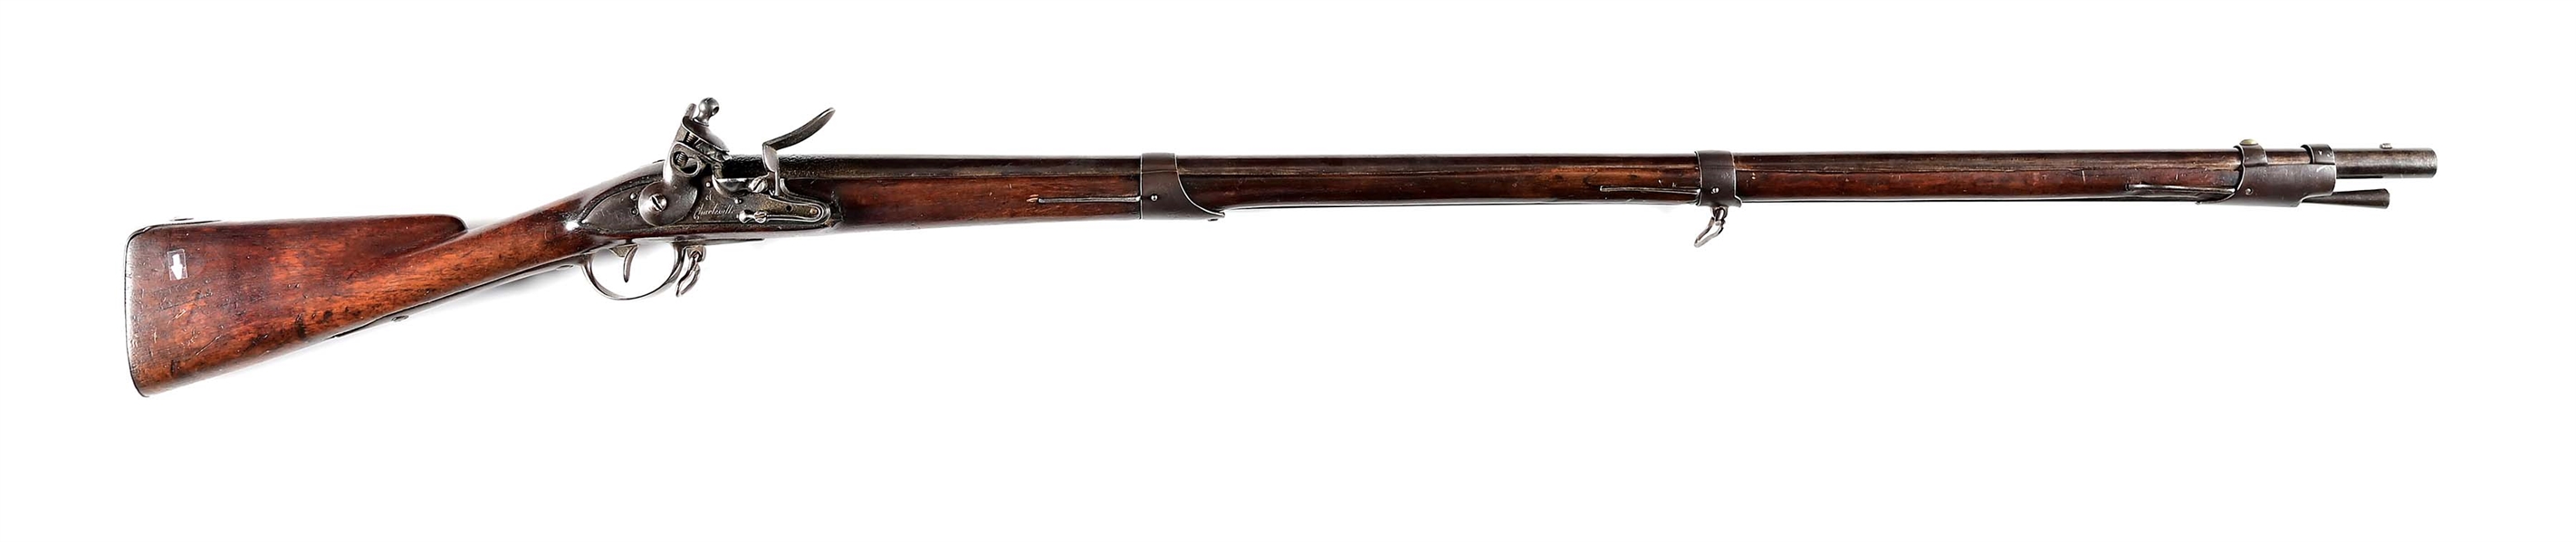 (A) SCARCE UNITED STATES MARKED AND US SURCHARGED CHARLEVILLE MODEL 1774 FLINTLOCK MUSKET, DATED 1775.